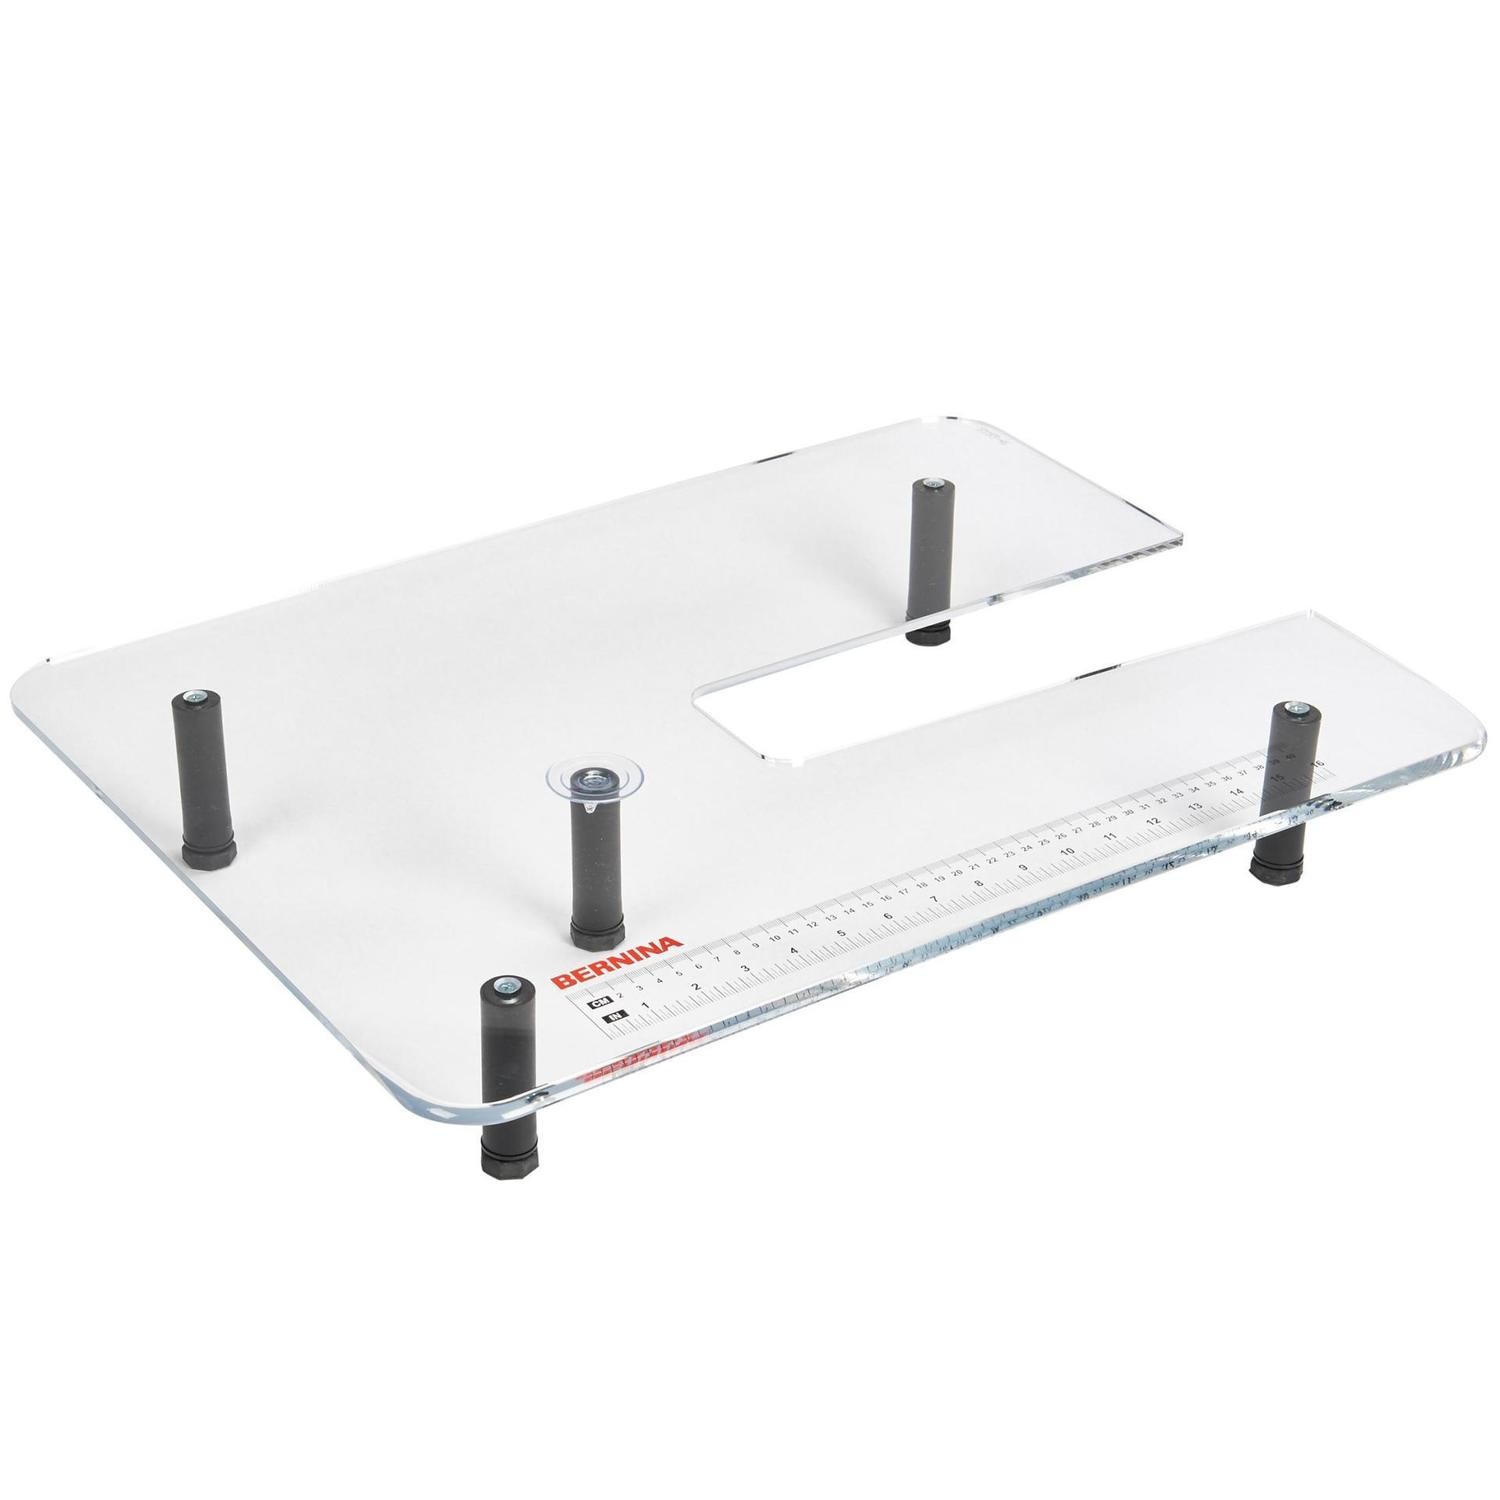 Plexiglass Extension Table for Quilting - Category B4 / B5 / C3 Only- Bernina